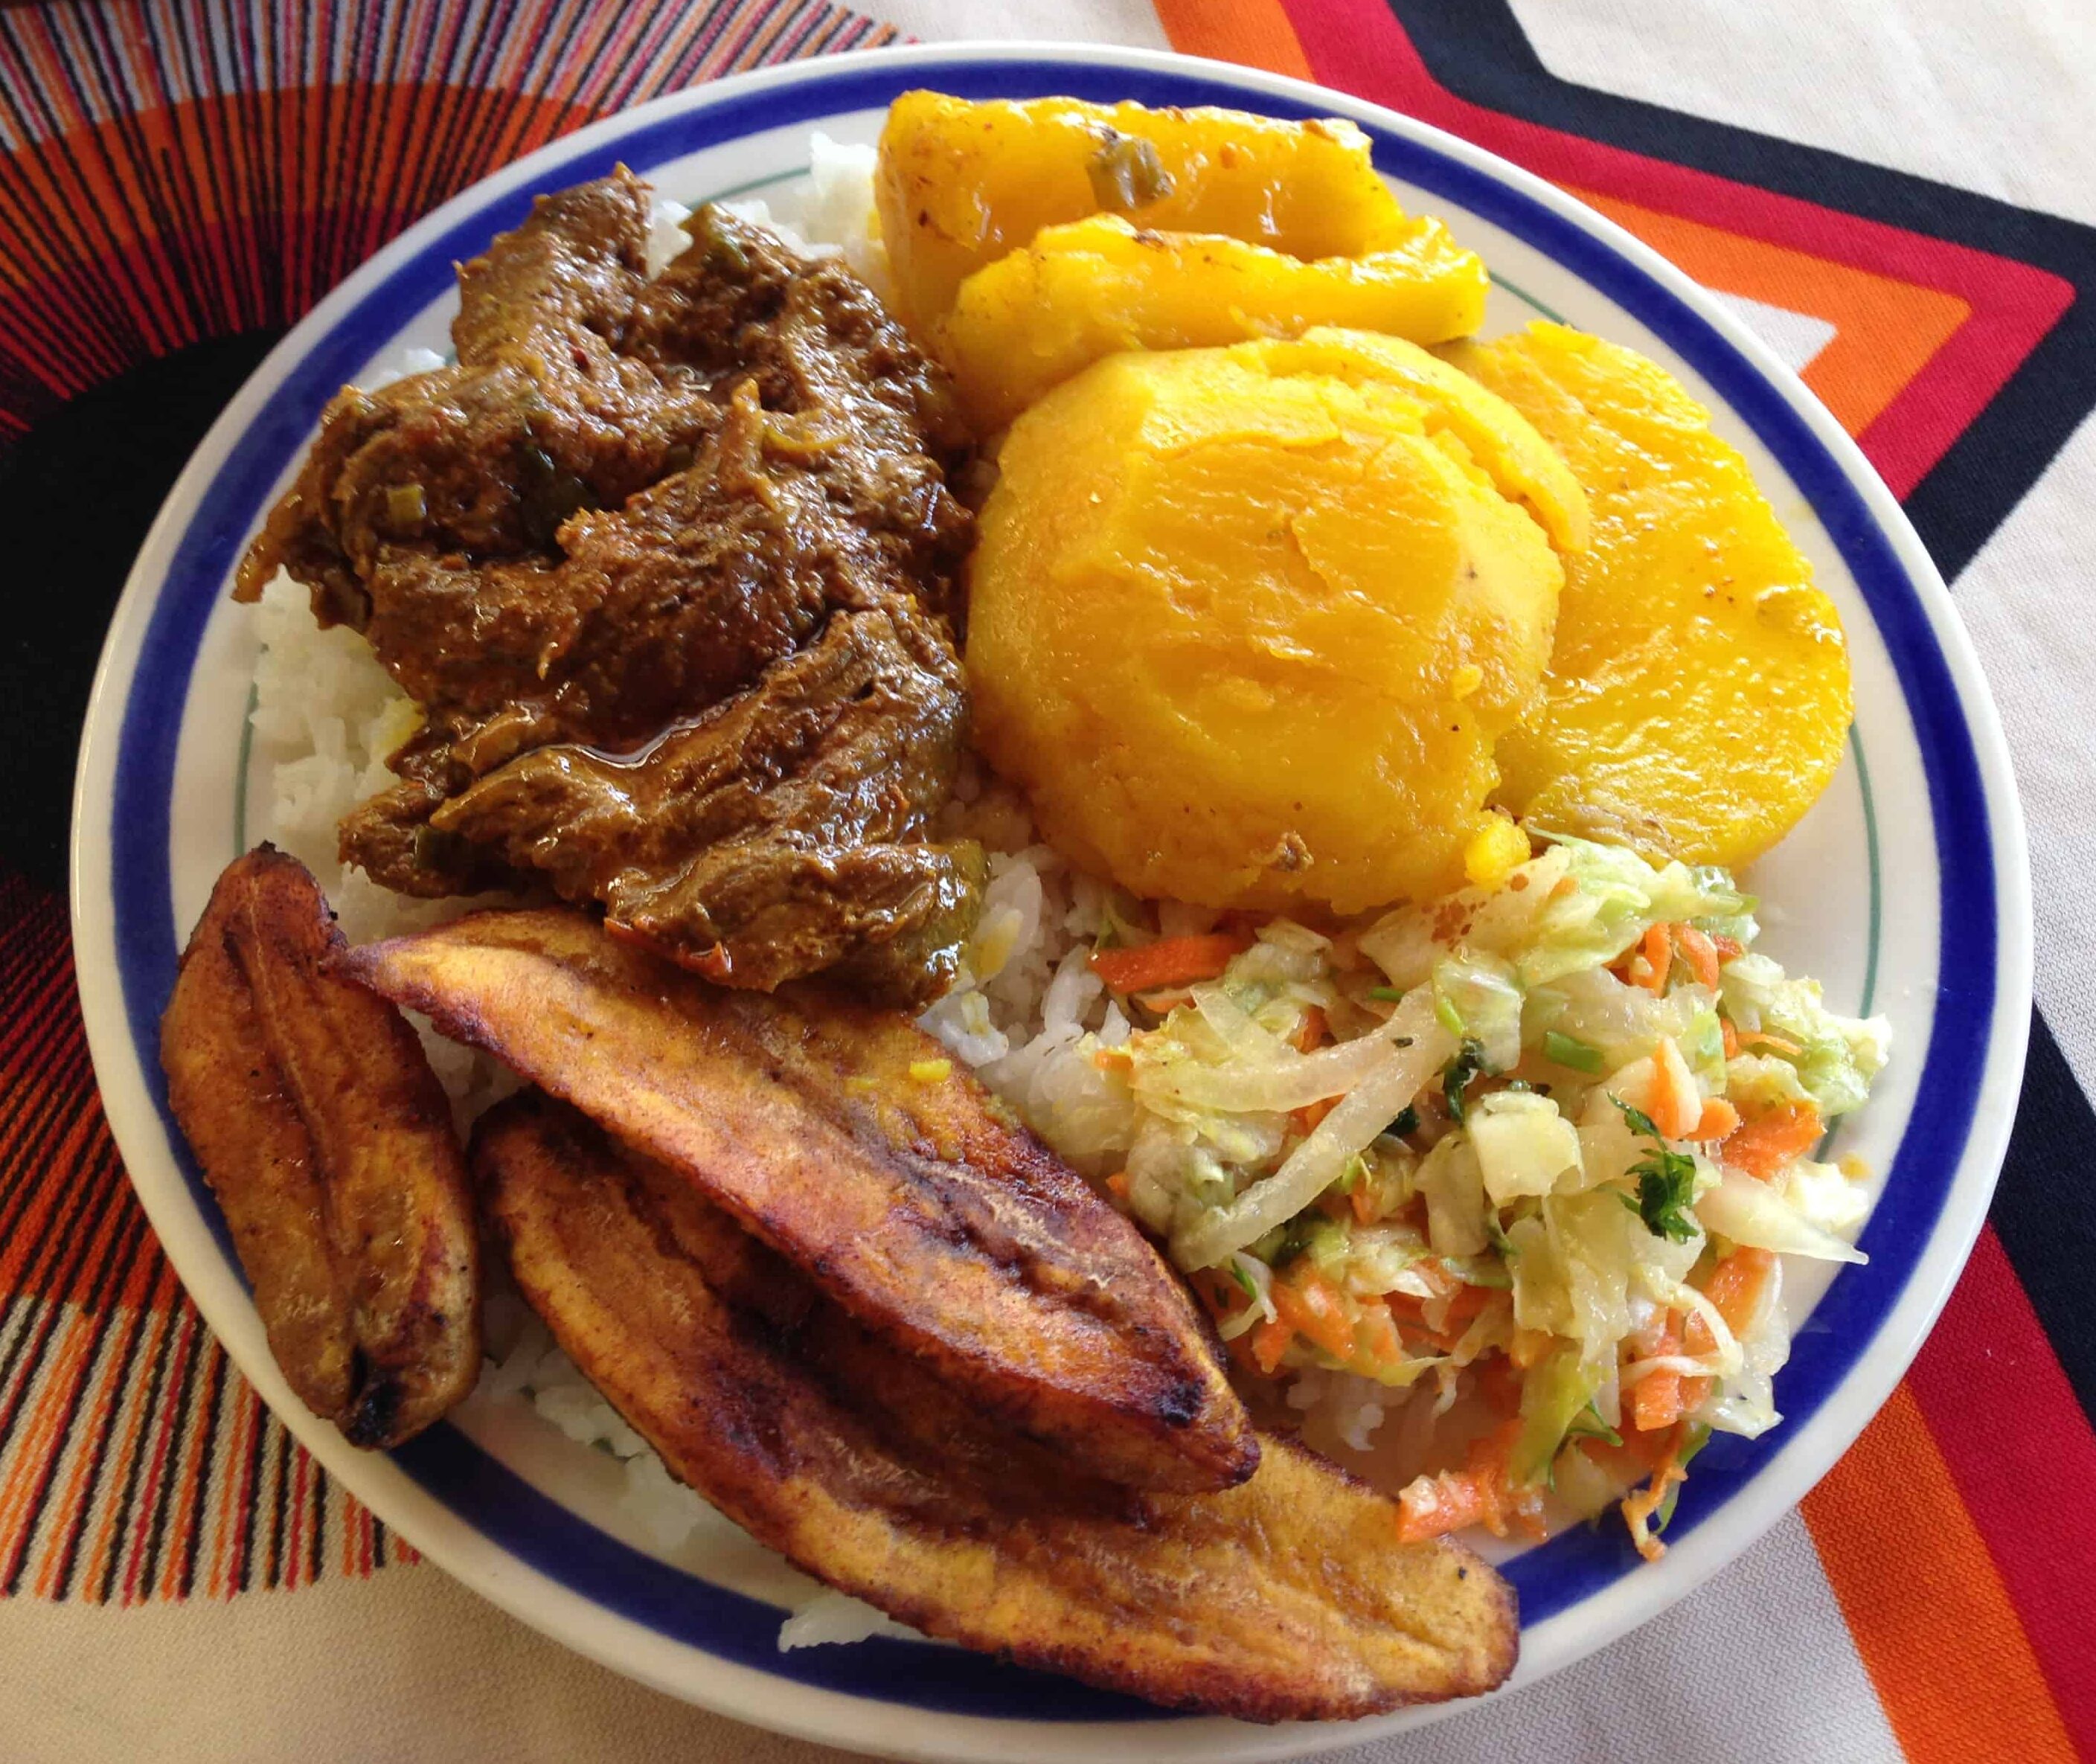 Lunch at Luciela's house in Taparcal, Belén de Umbría, Risaralda, Colombia